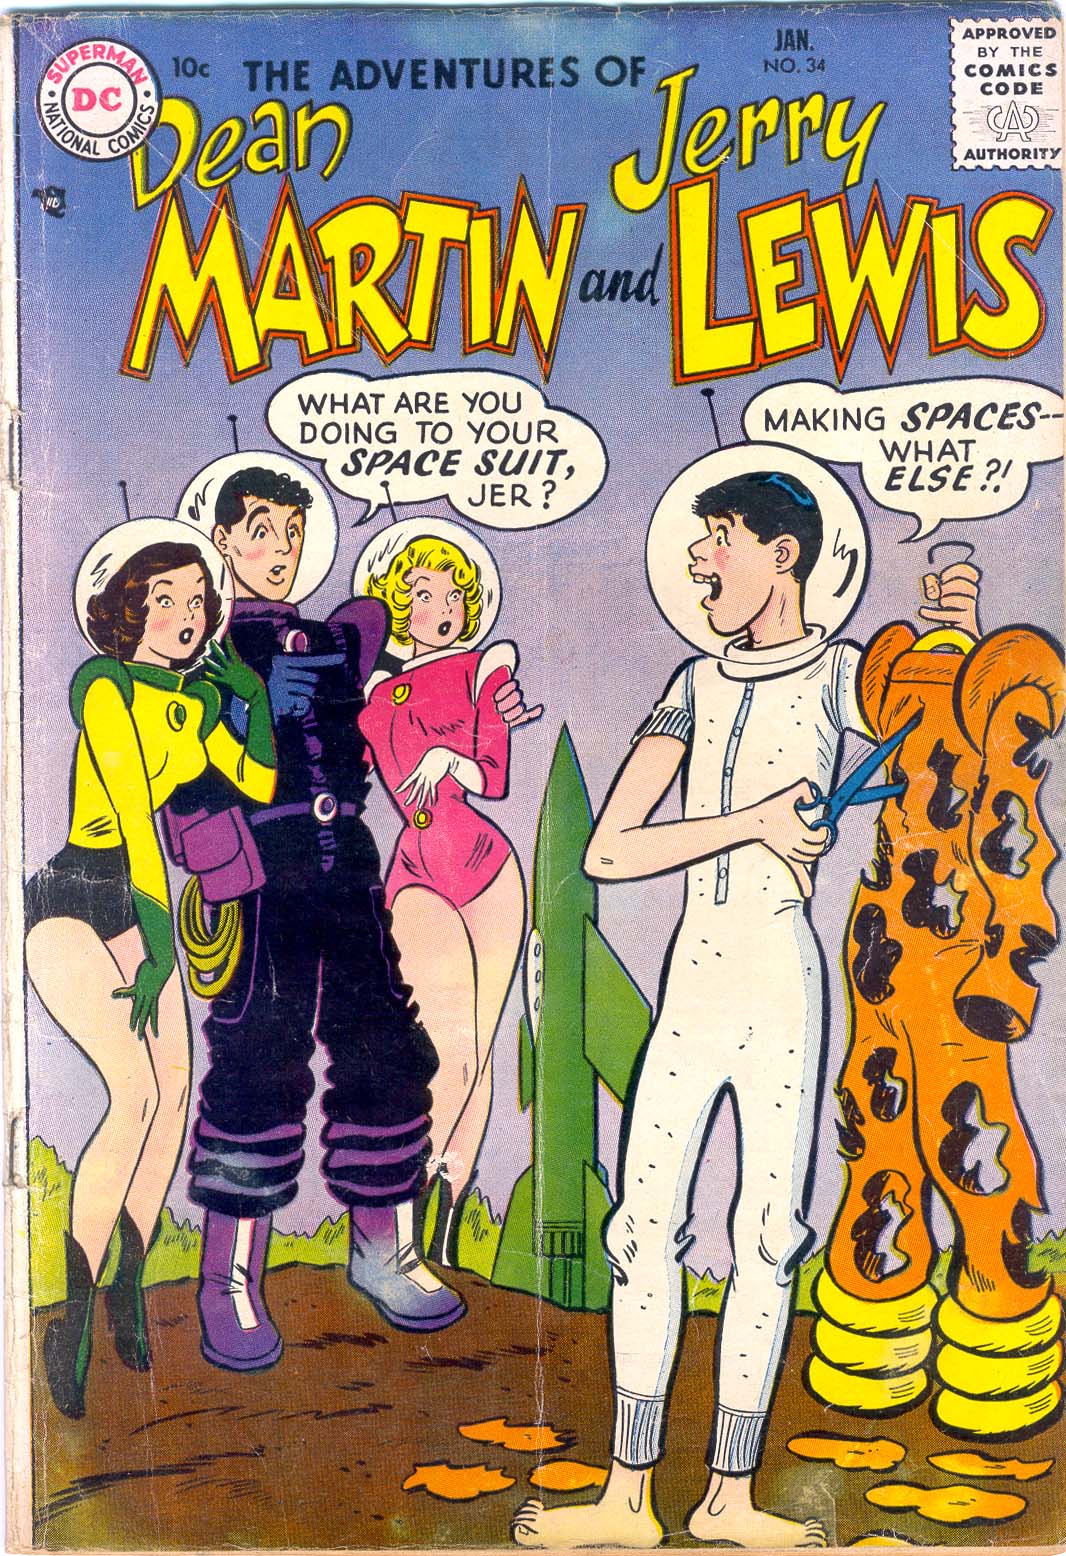 Read online The Adventures of Dean Martin and Jerry Lewis comic -  Issue #34 - 1